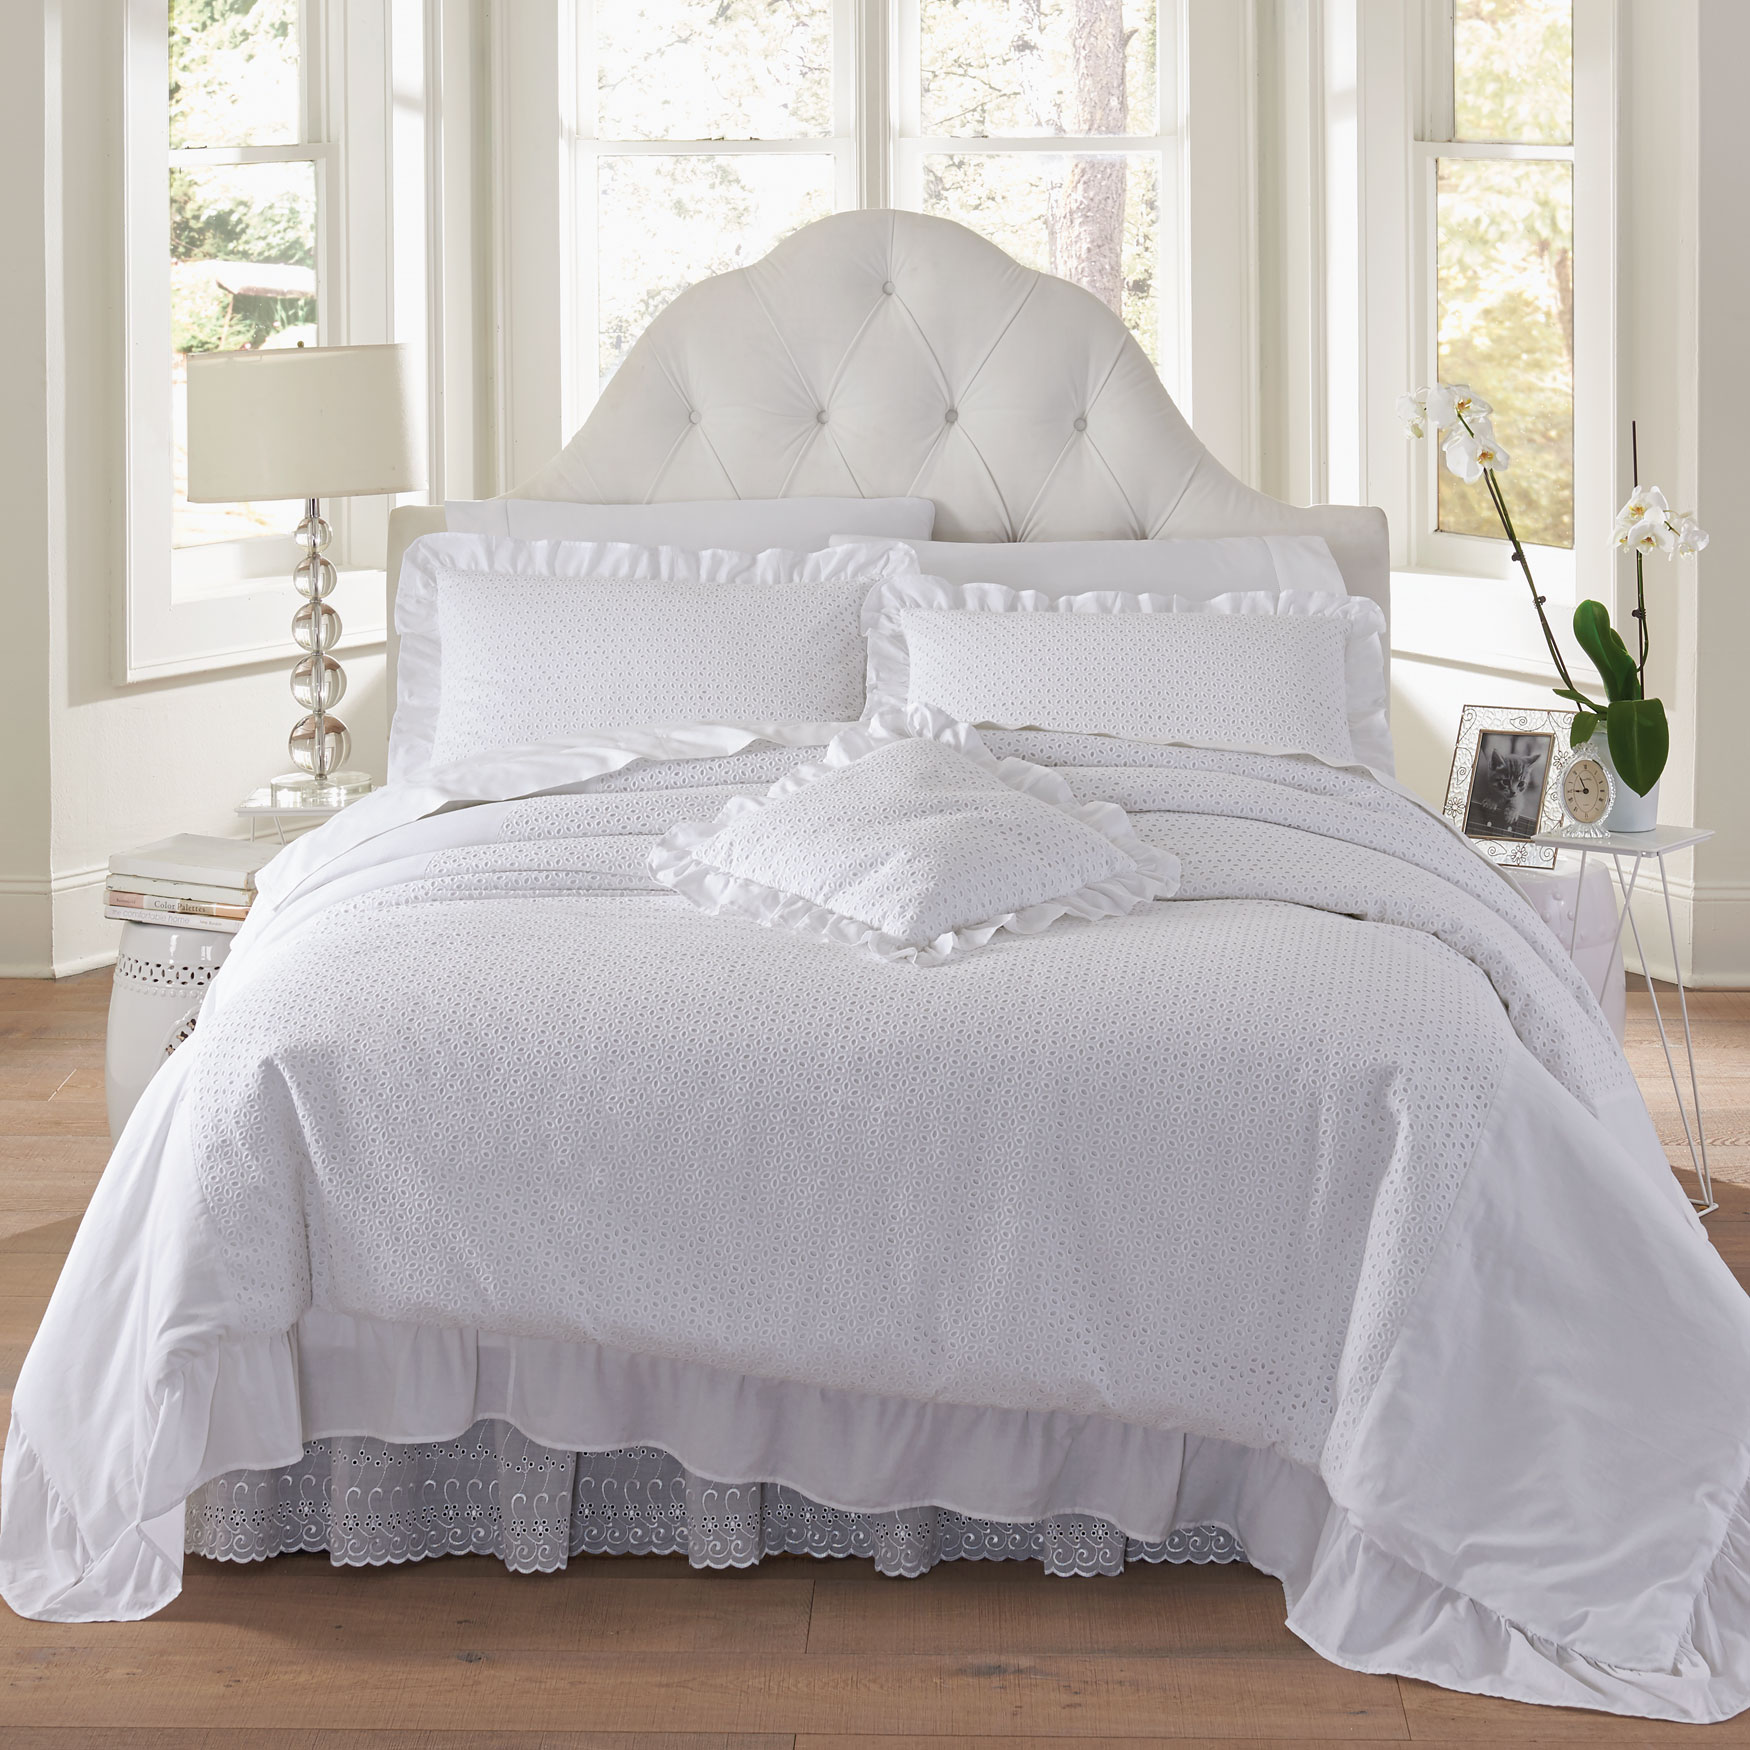 Grace Eyelet Lace Comforter| Extra 60% OFF Last Chance! | Brylane Home